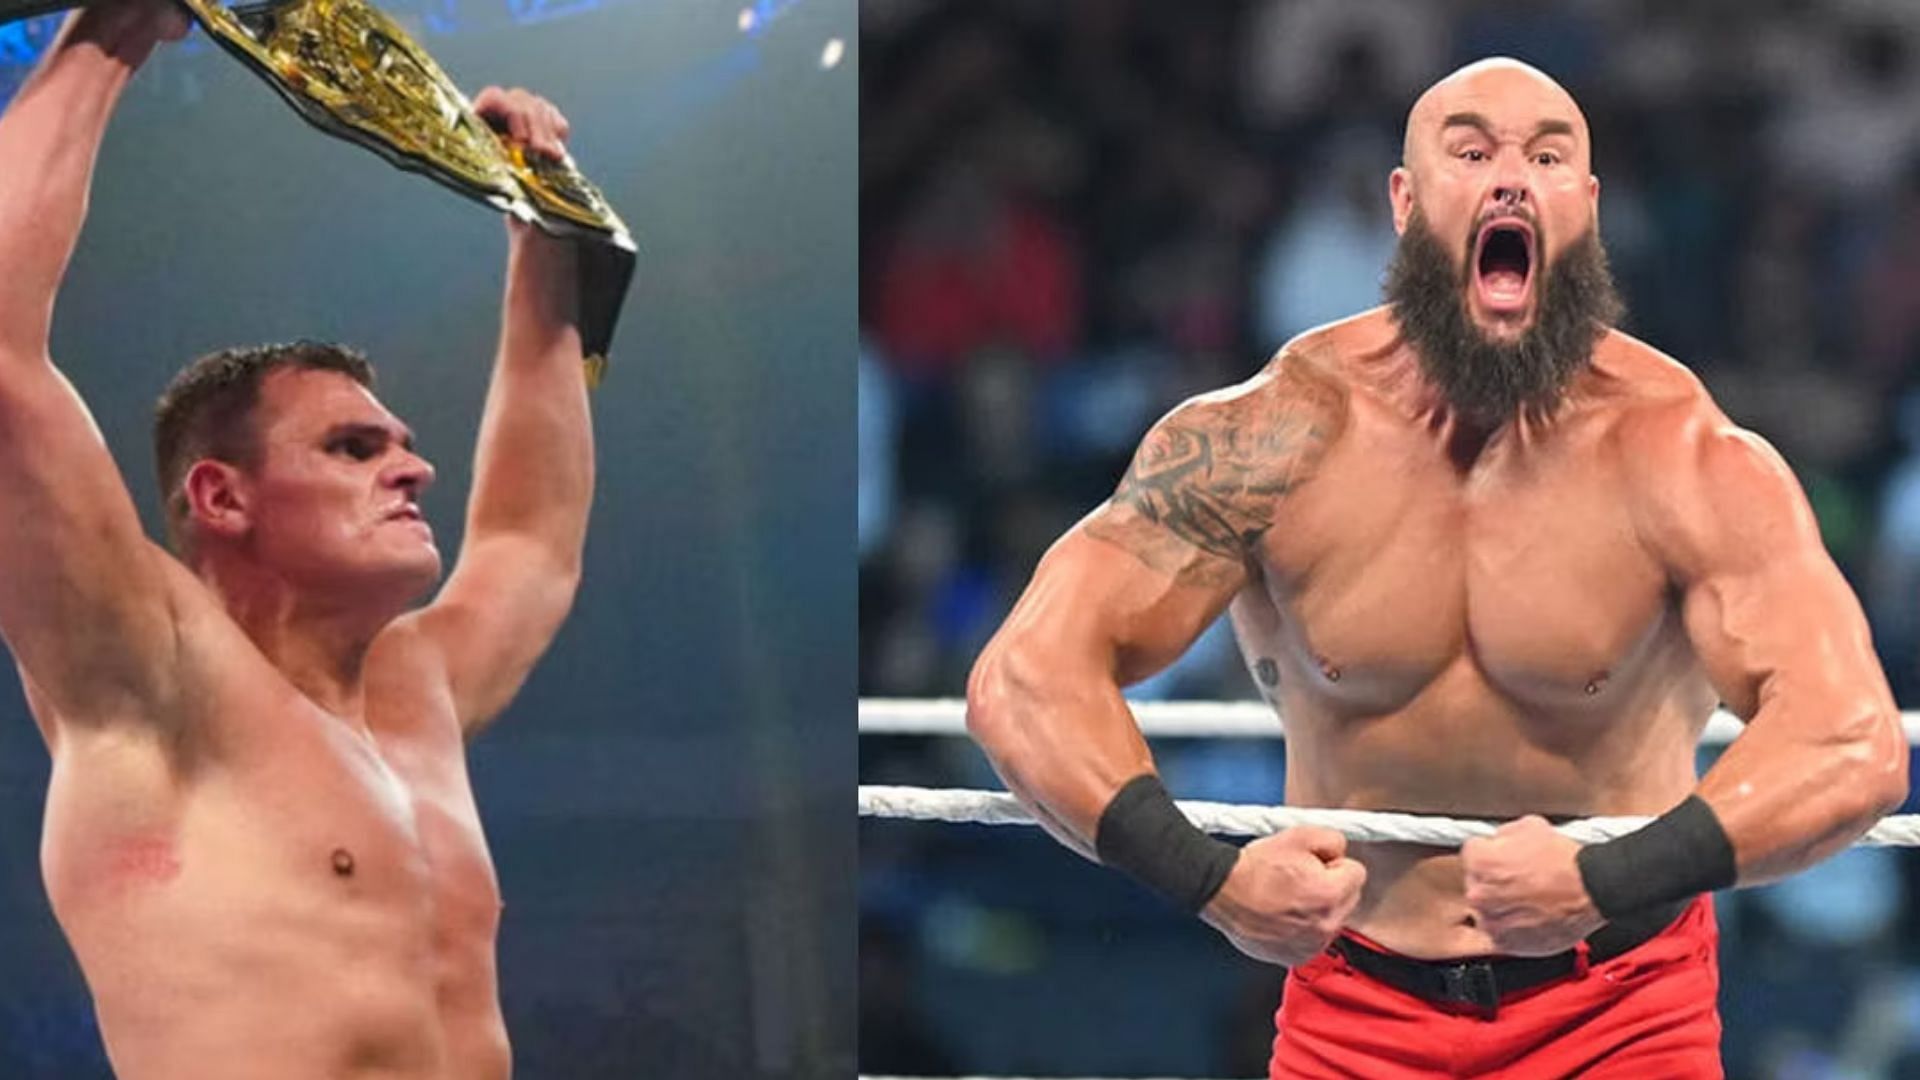 WWE appears to be setting up GUNTHER vs. Braun Strowman.